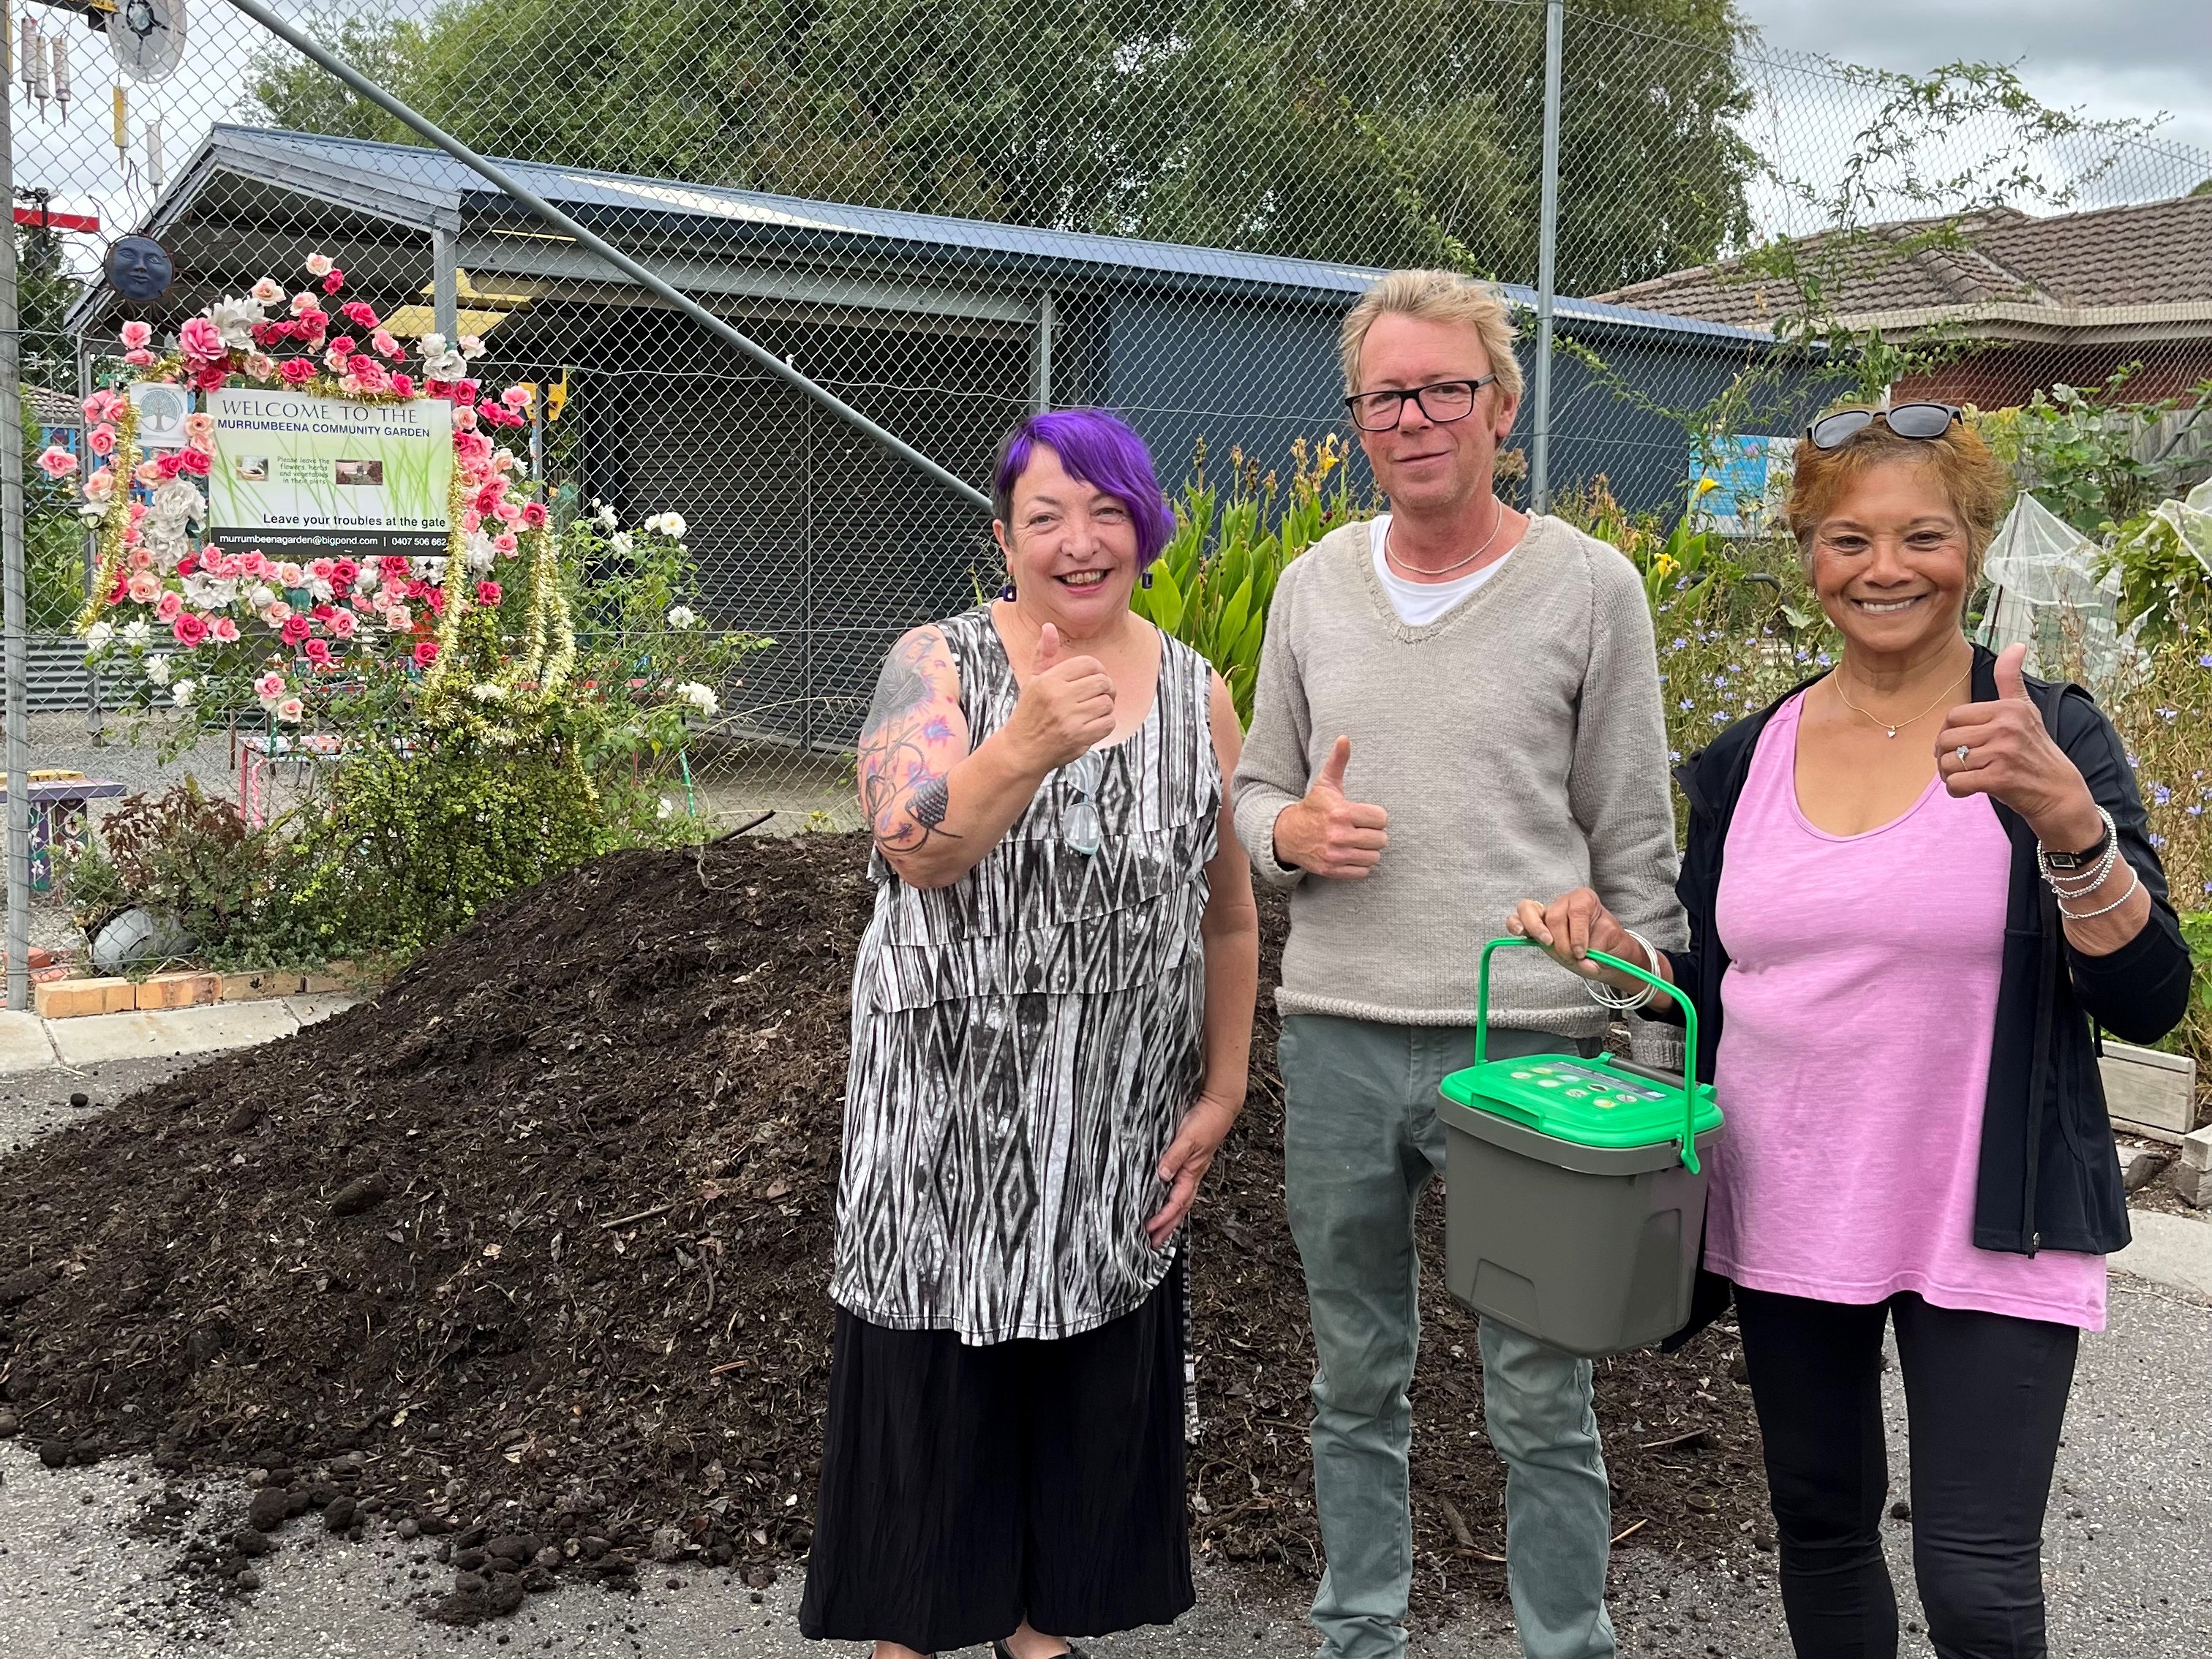 Food recycled in Glen Eira green bins gets turned into compost. Photo: Members of Murrumbeena Community Garden with a compost delivery.